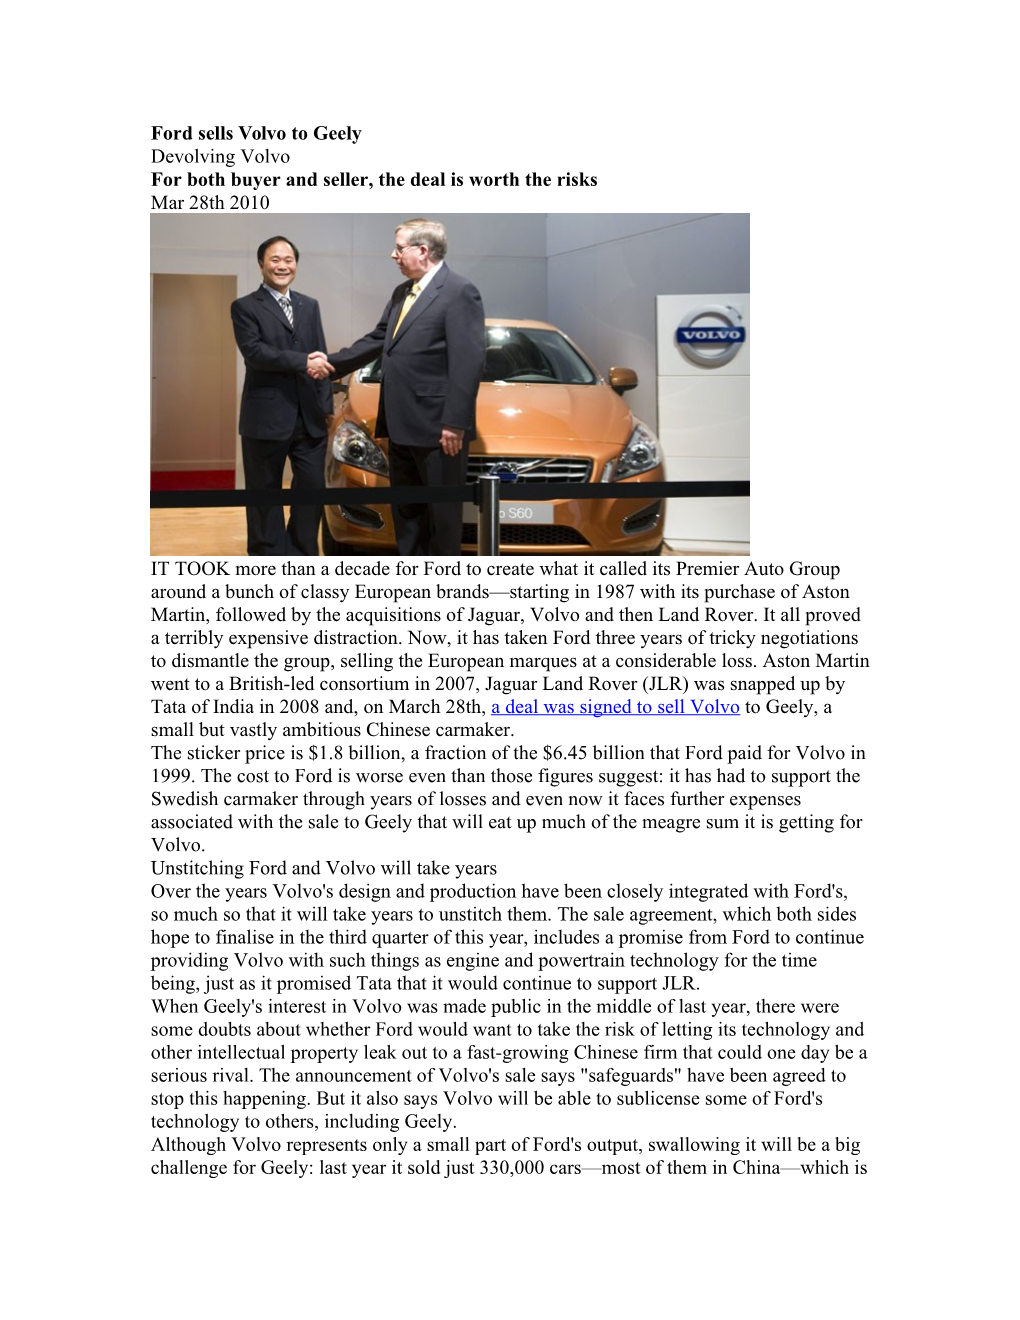 Ford Sells Volvo to Geely